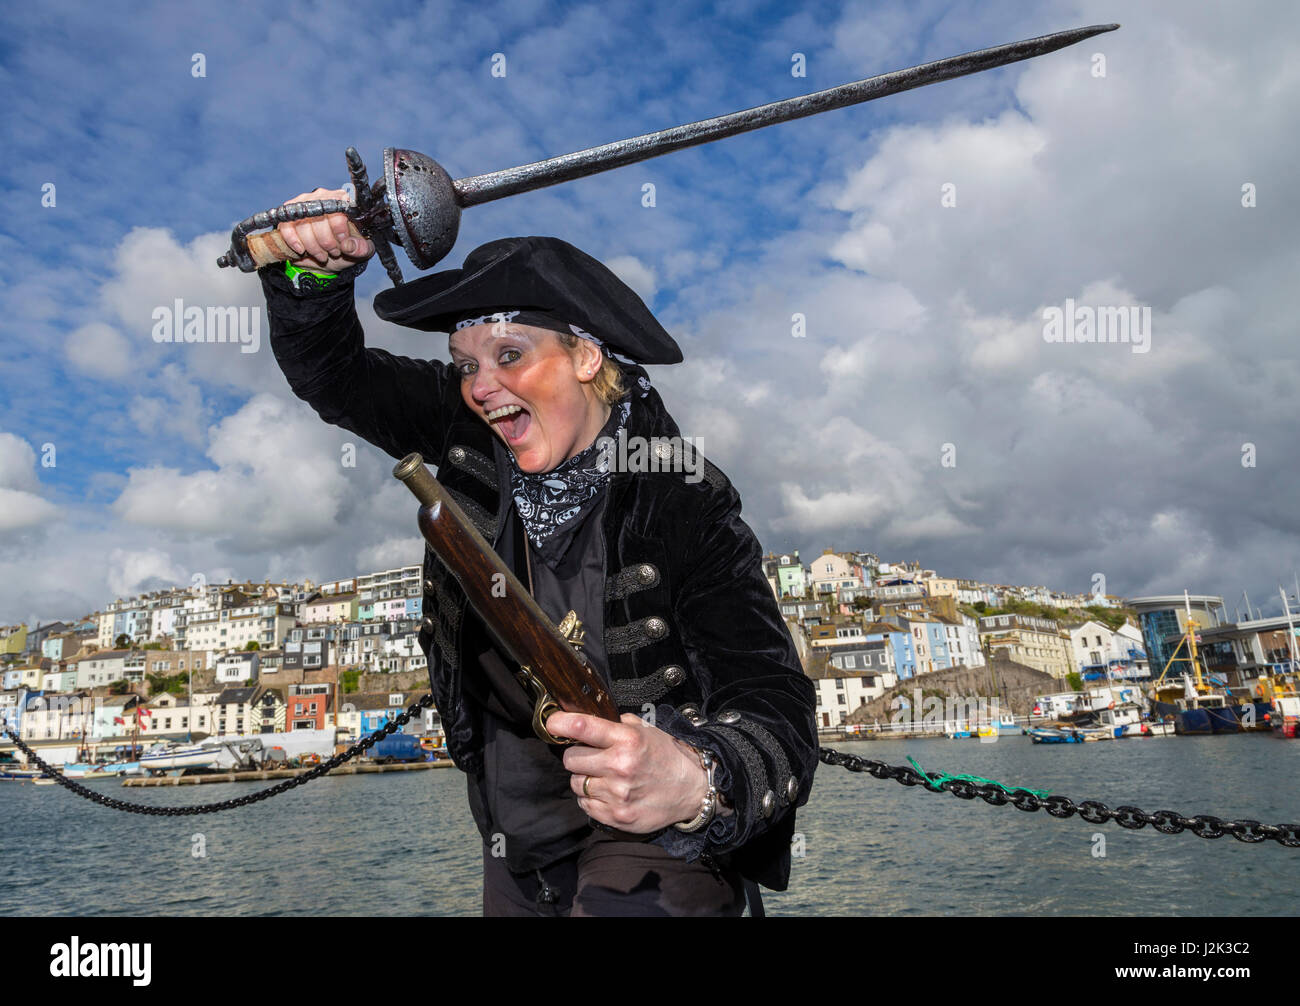 Brixham, Devon, 29th Apr 17 Pirate Queen shows her swashbuckling stuff at the 8th Brixham Pirate Festival, one of the worlds biggest gatherings of 'Infamous pirates and lowly scallywags'. The festival runs until Bank Holiday Monday. Credit: South West Photos / Alamy Live News. Stock Photo